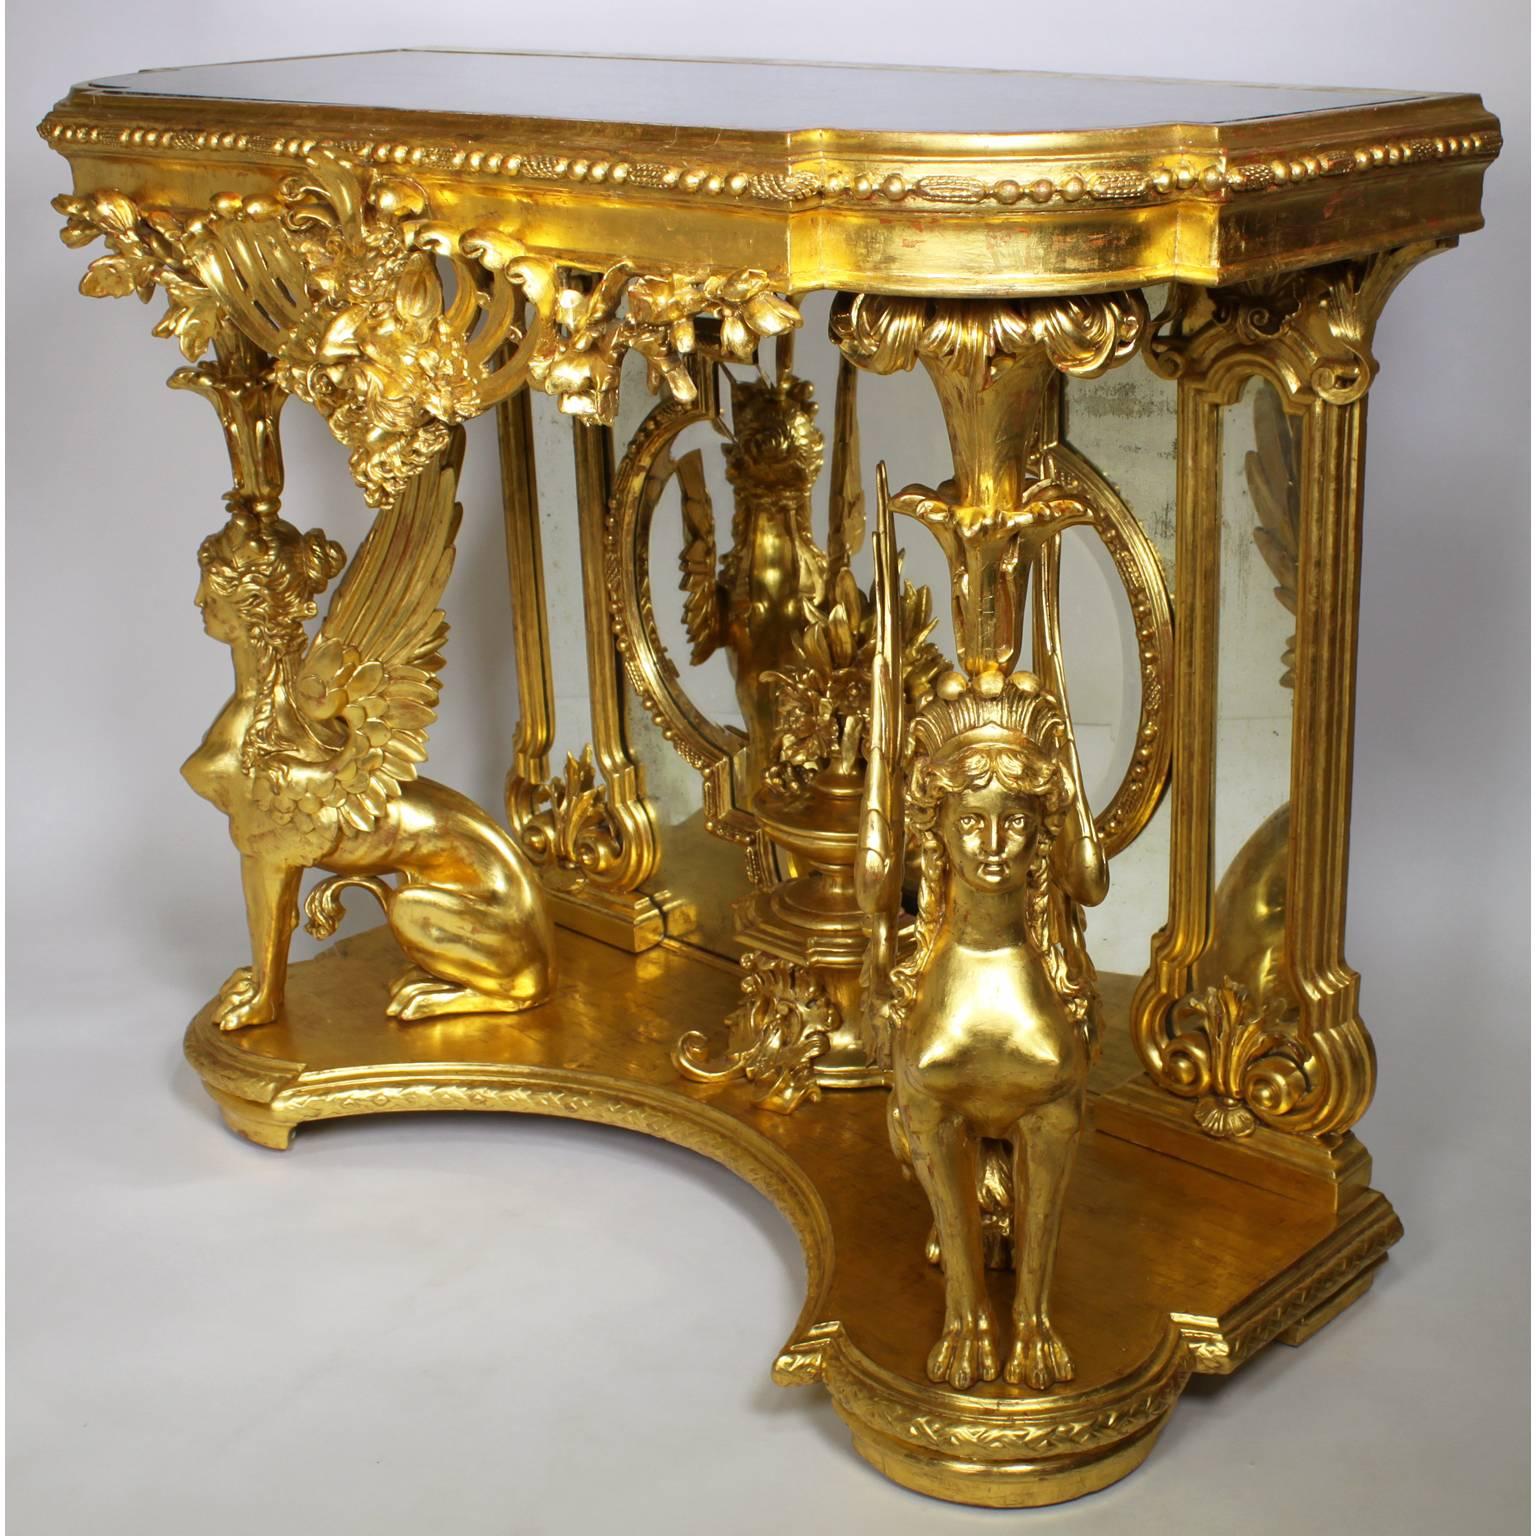 French Empire Revival 19th Century Giltwood Carved Figural Console and Mirror For Sale 1